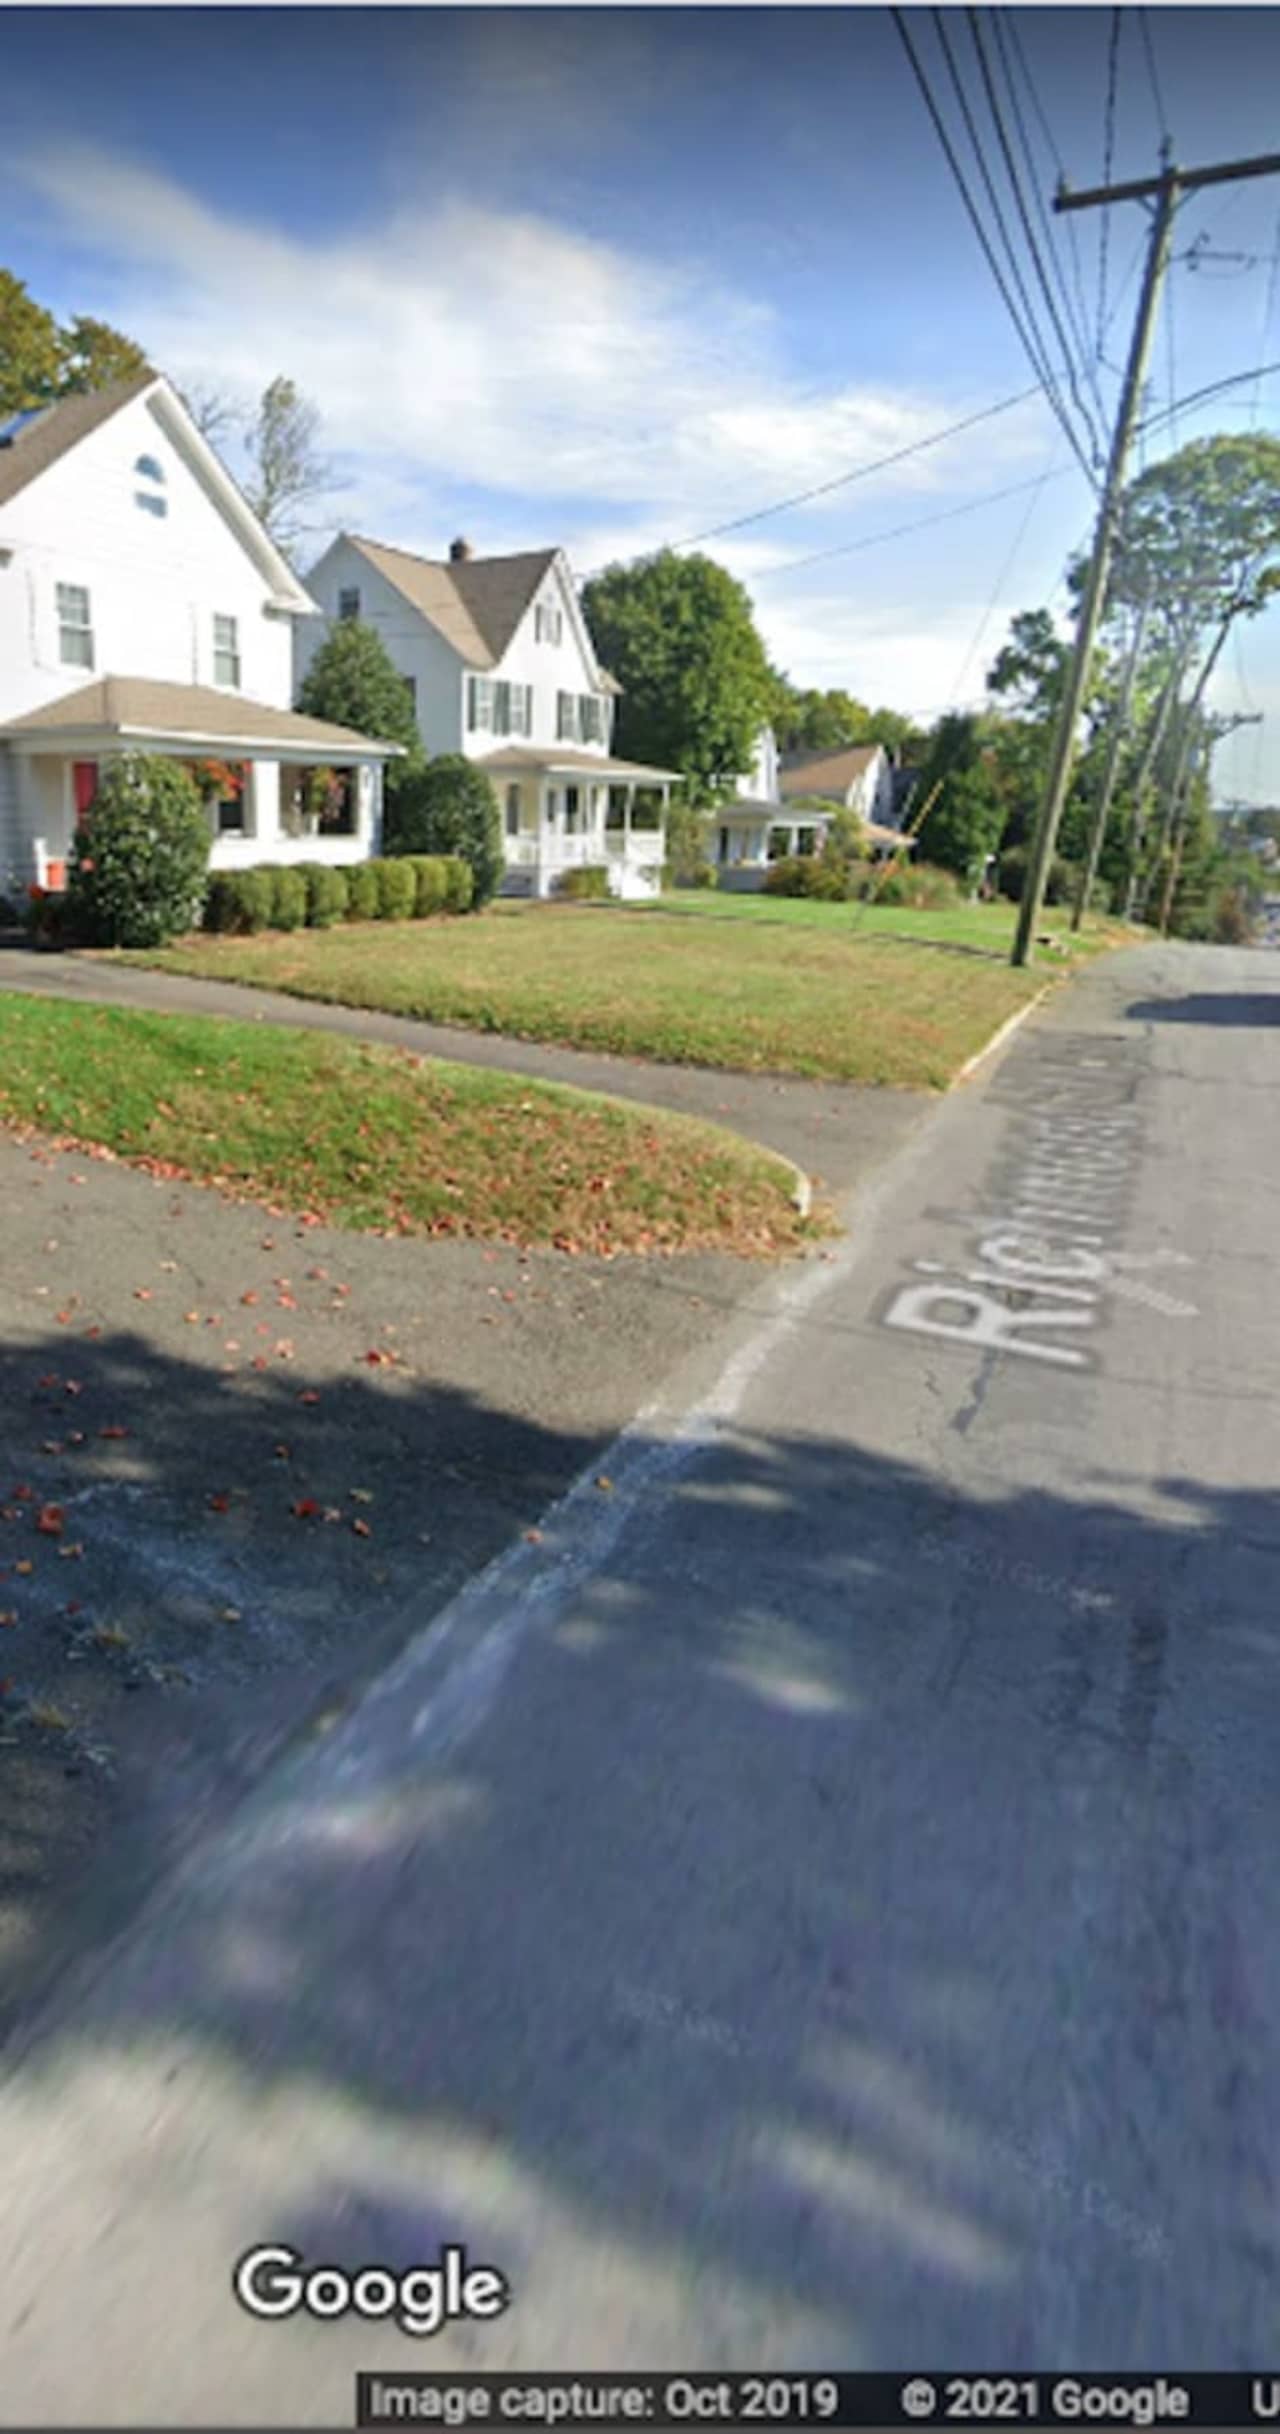 The area of Richmond Hill Road in New Canaan where the incident happened.